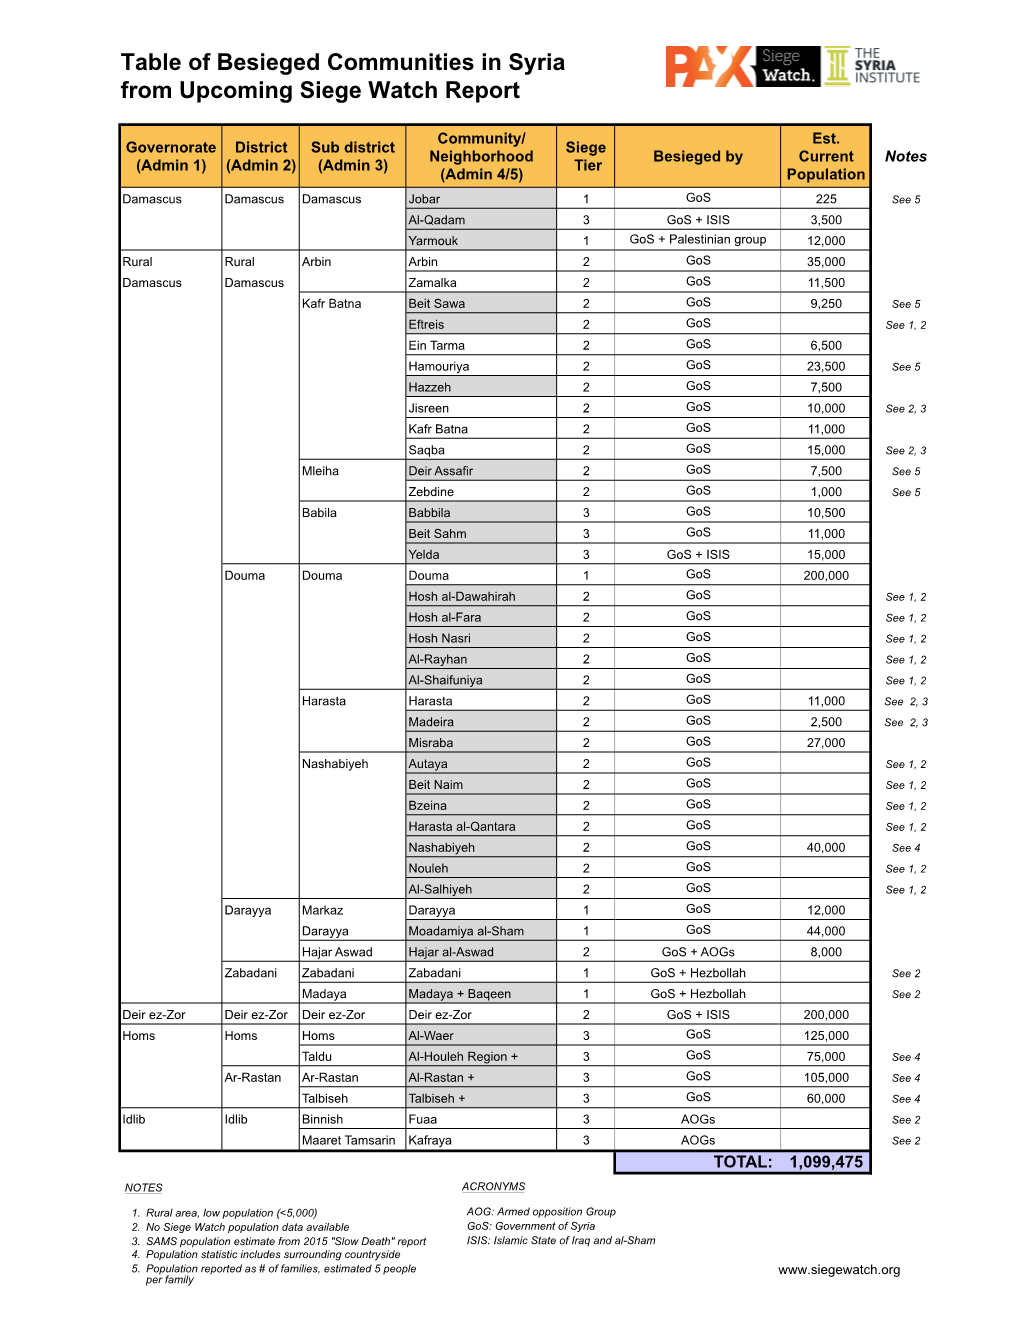 Table of Besieged Communities in Syria from Upcoming Siege Watch Report